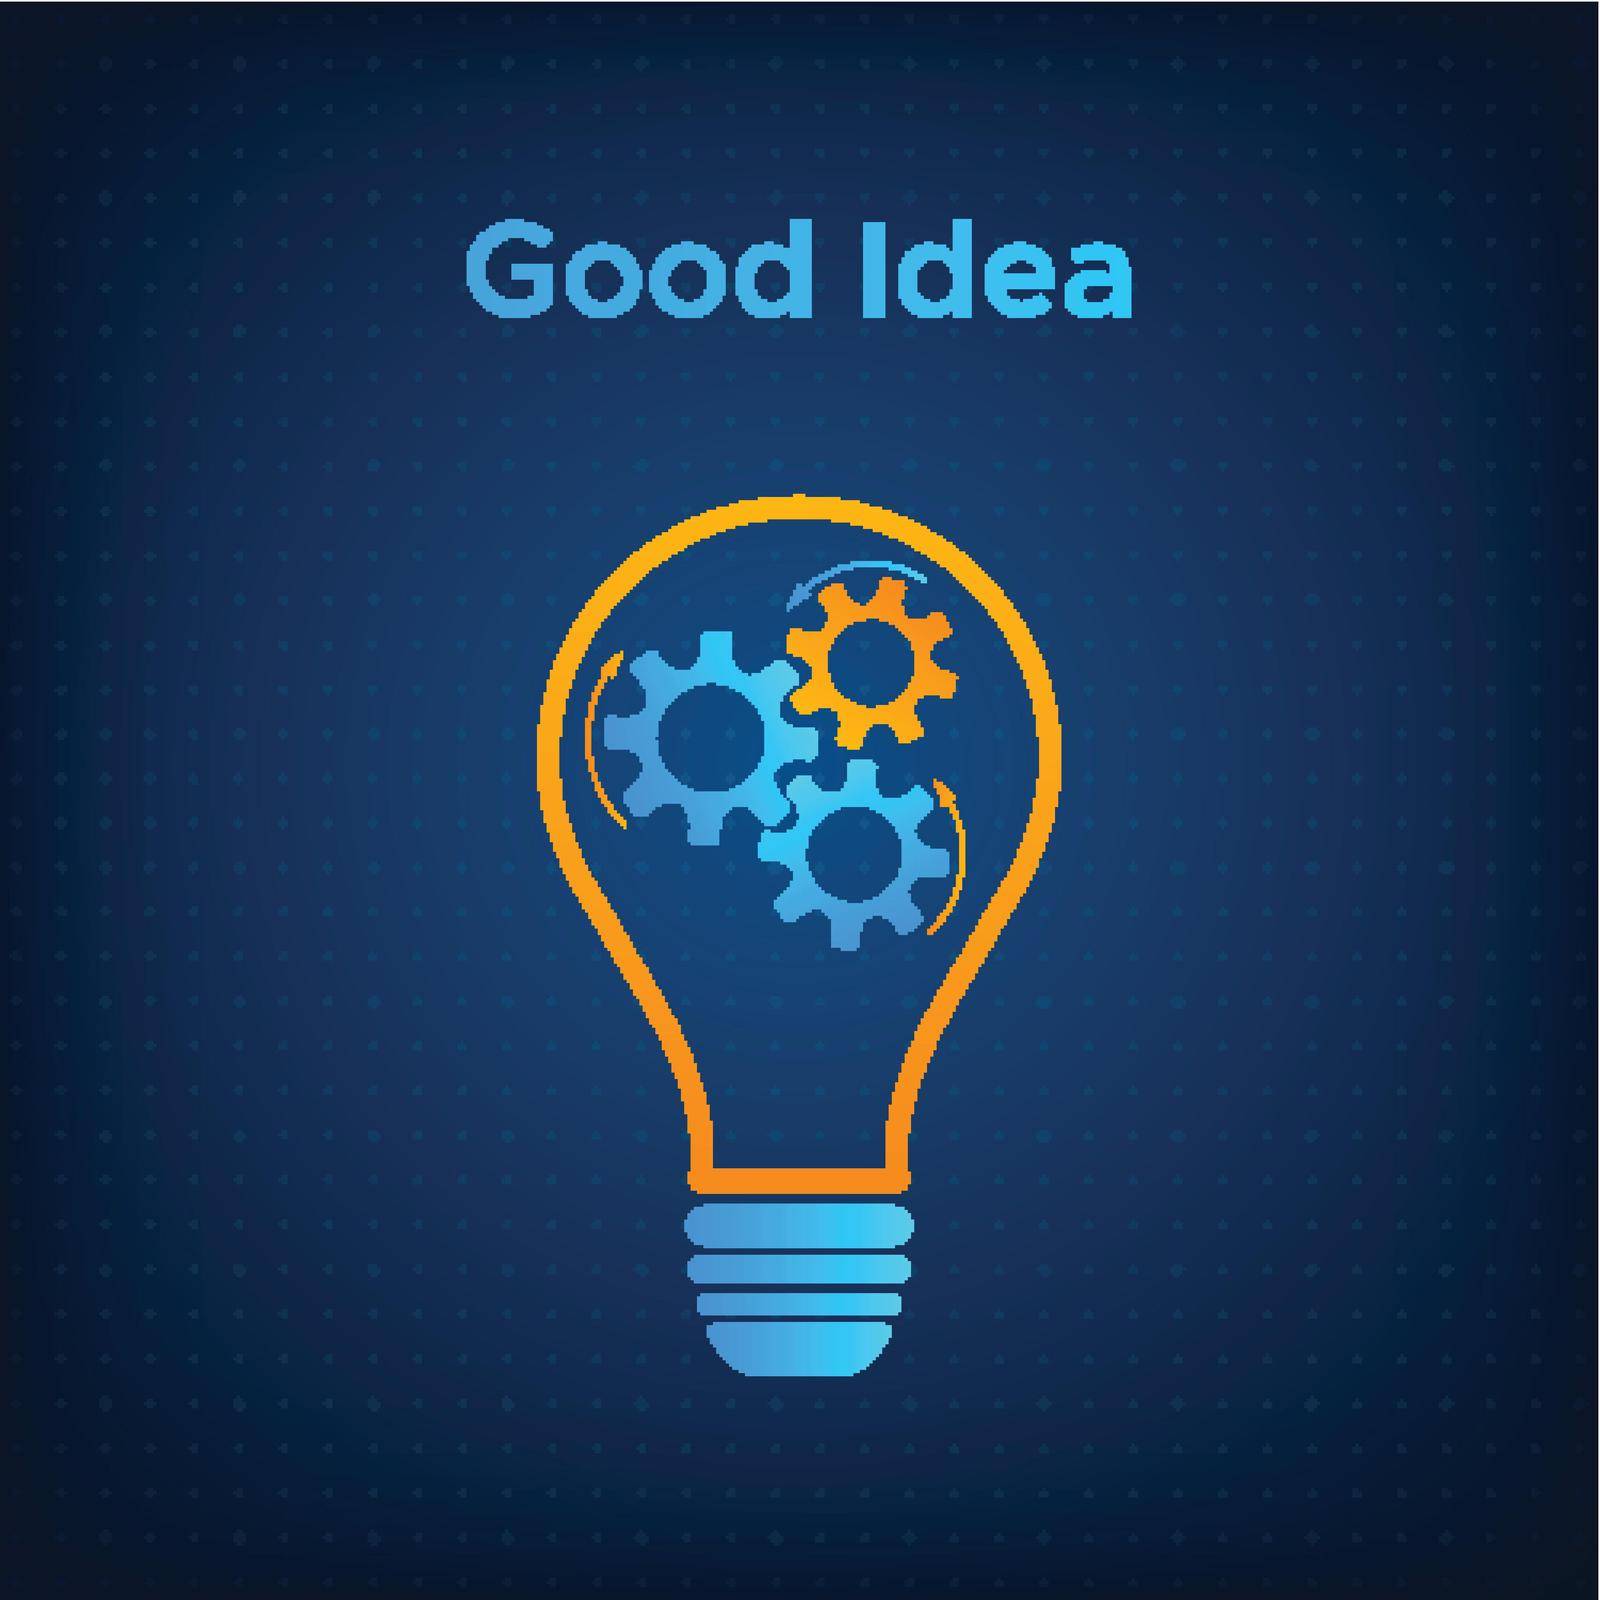 Gear lightbulb creative teamwork concept vector illustration. Orange bulb silhouette with blue cogwheel inside innovation ideas graphic. Line lamp with gear technology background business concept